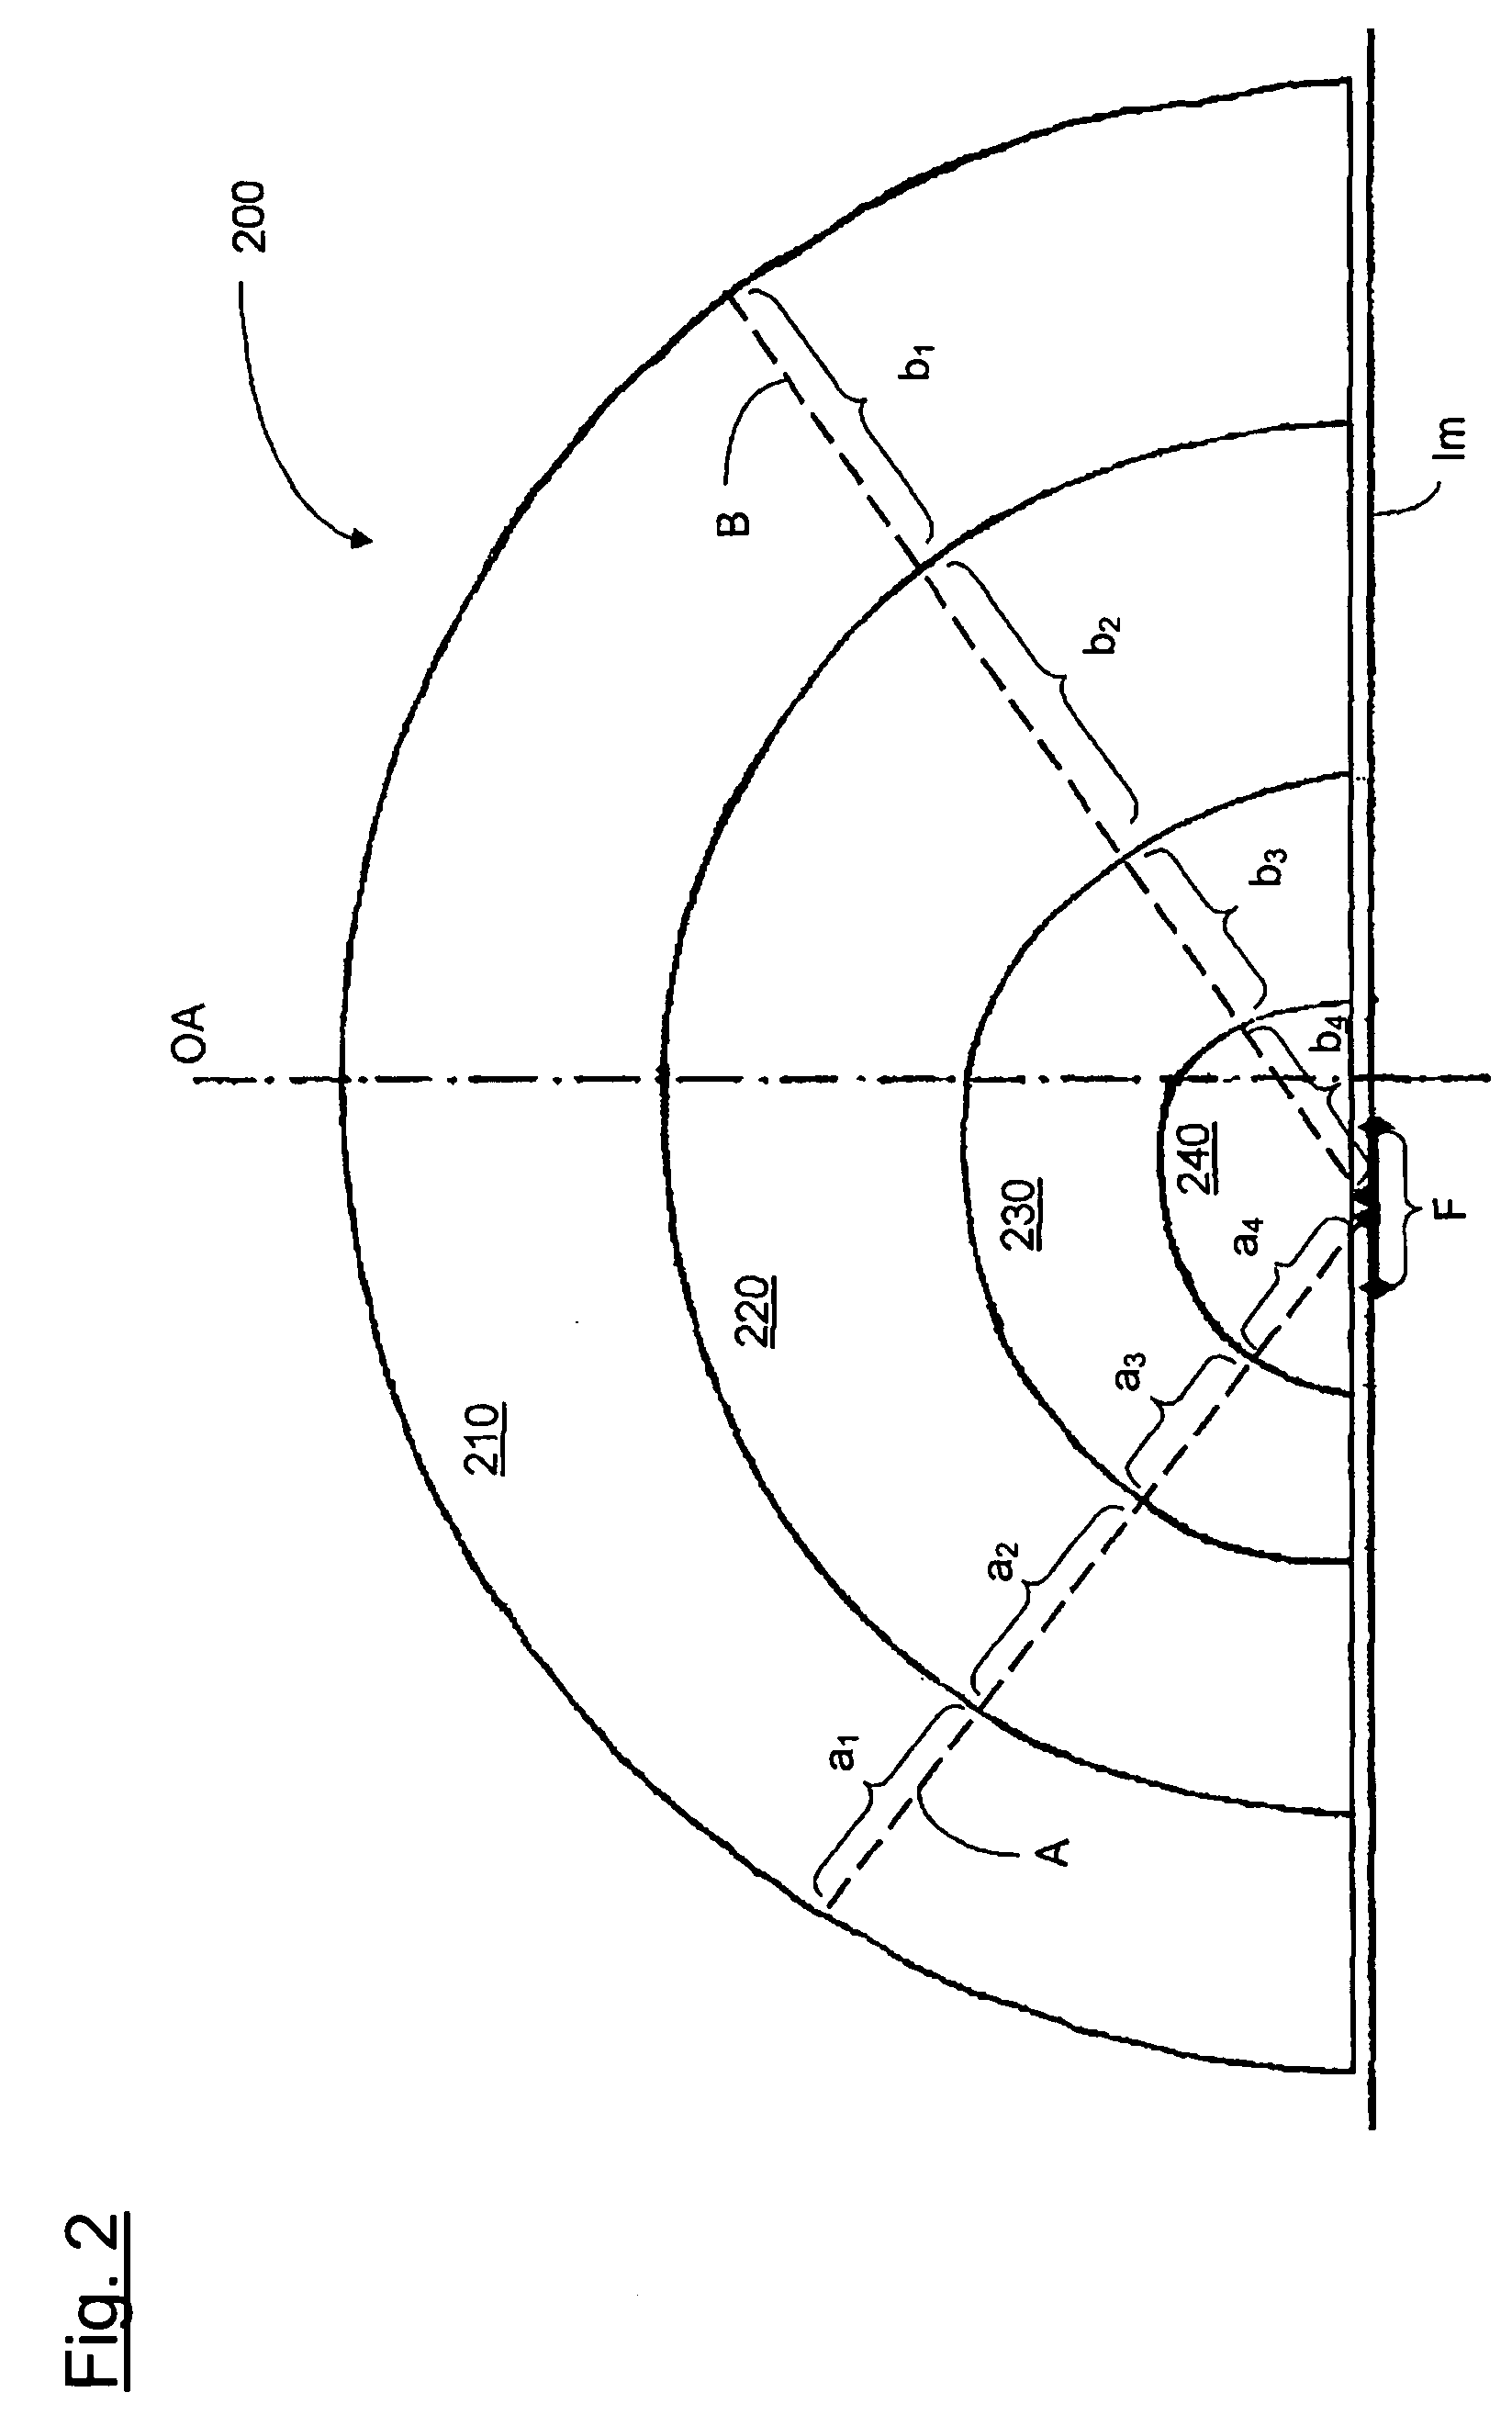 Imaging system, in particular a projection objective of a microlithographic projection exposure apparatus